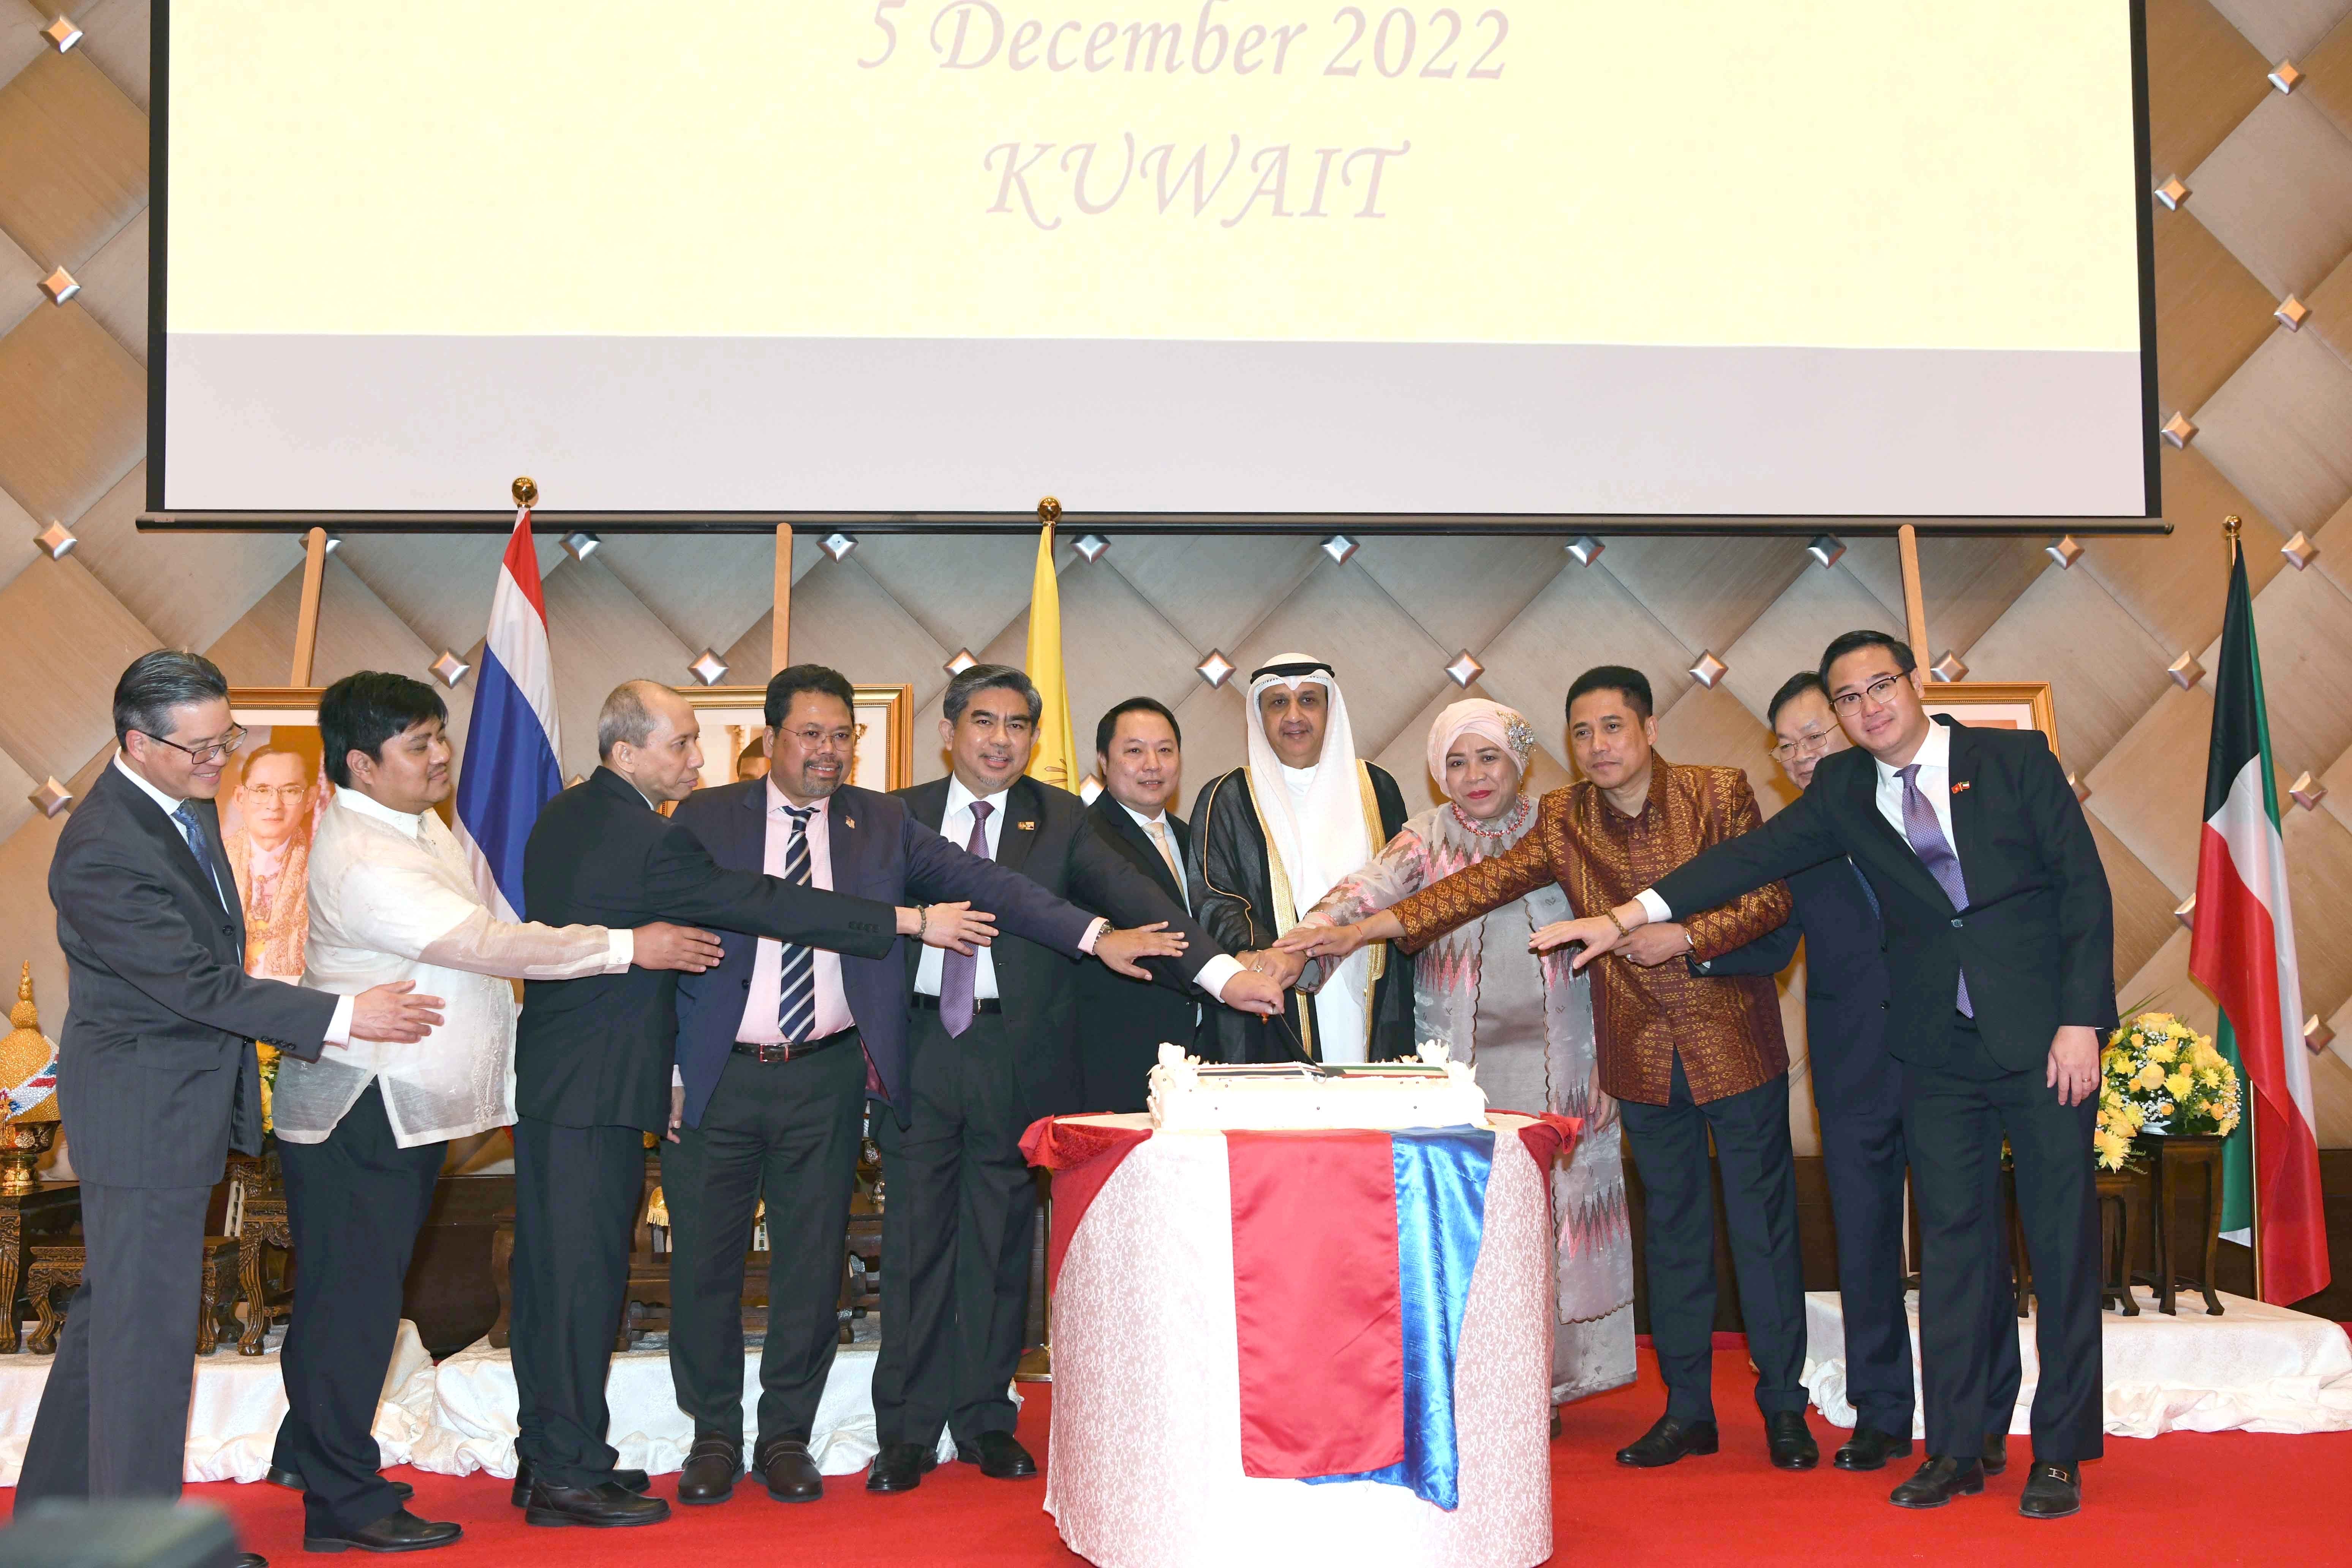 Reception held by Thailand Embassy in Kuwait on its National Day